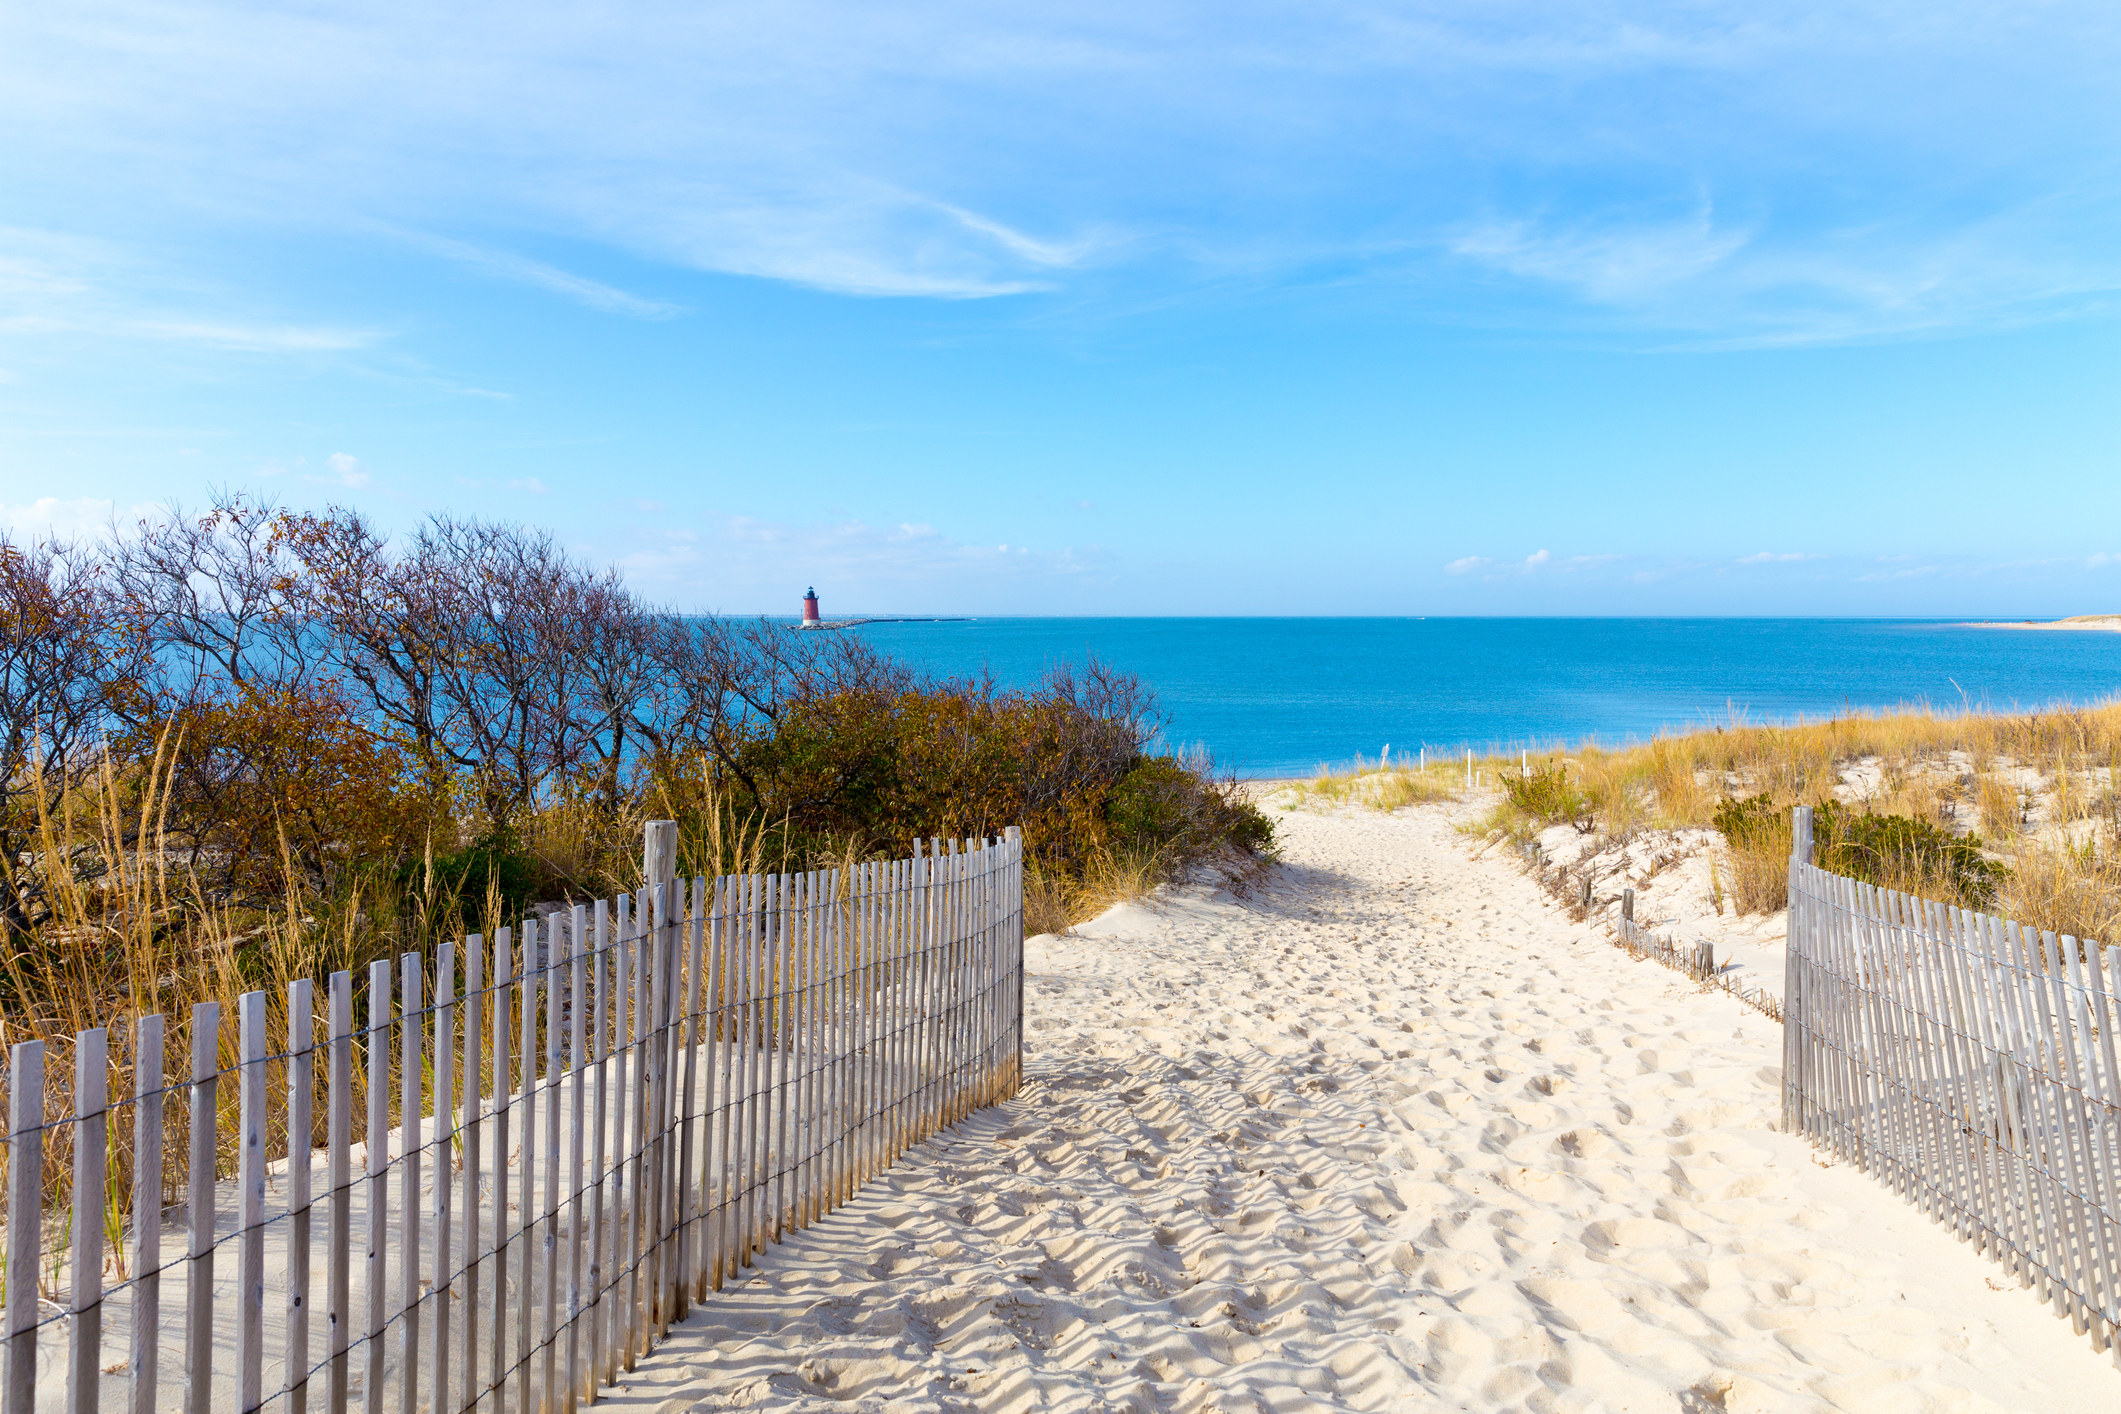 A sandy path leads to a view of the ocean and clear skies above